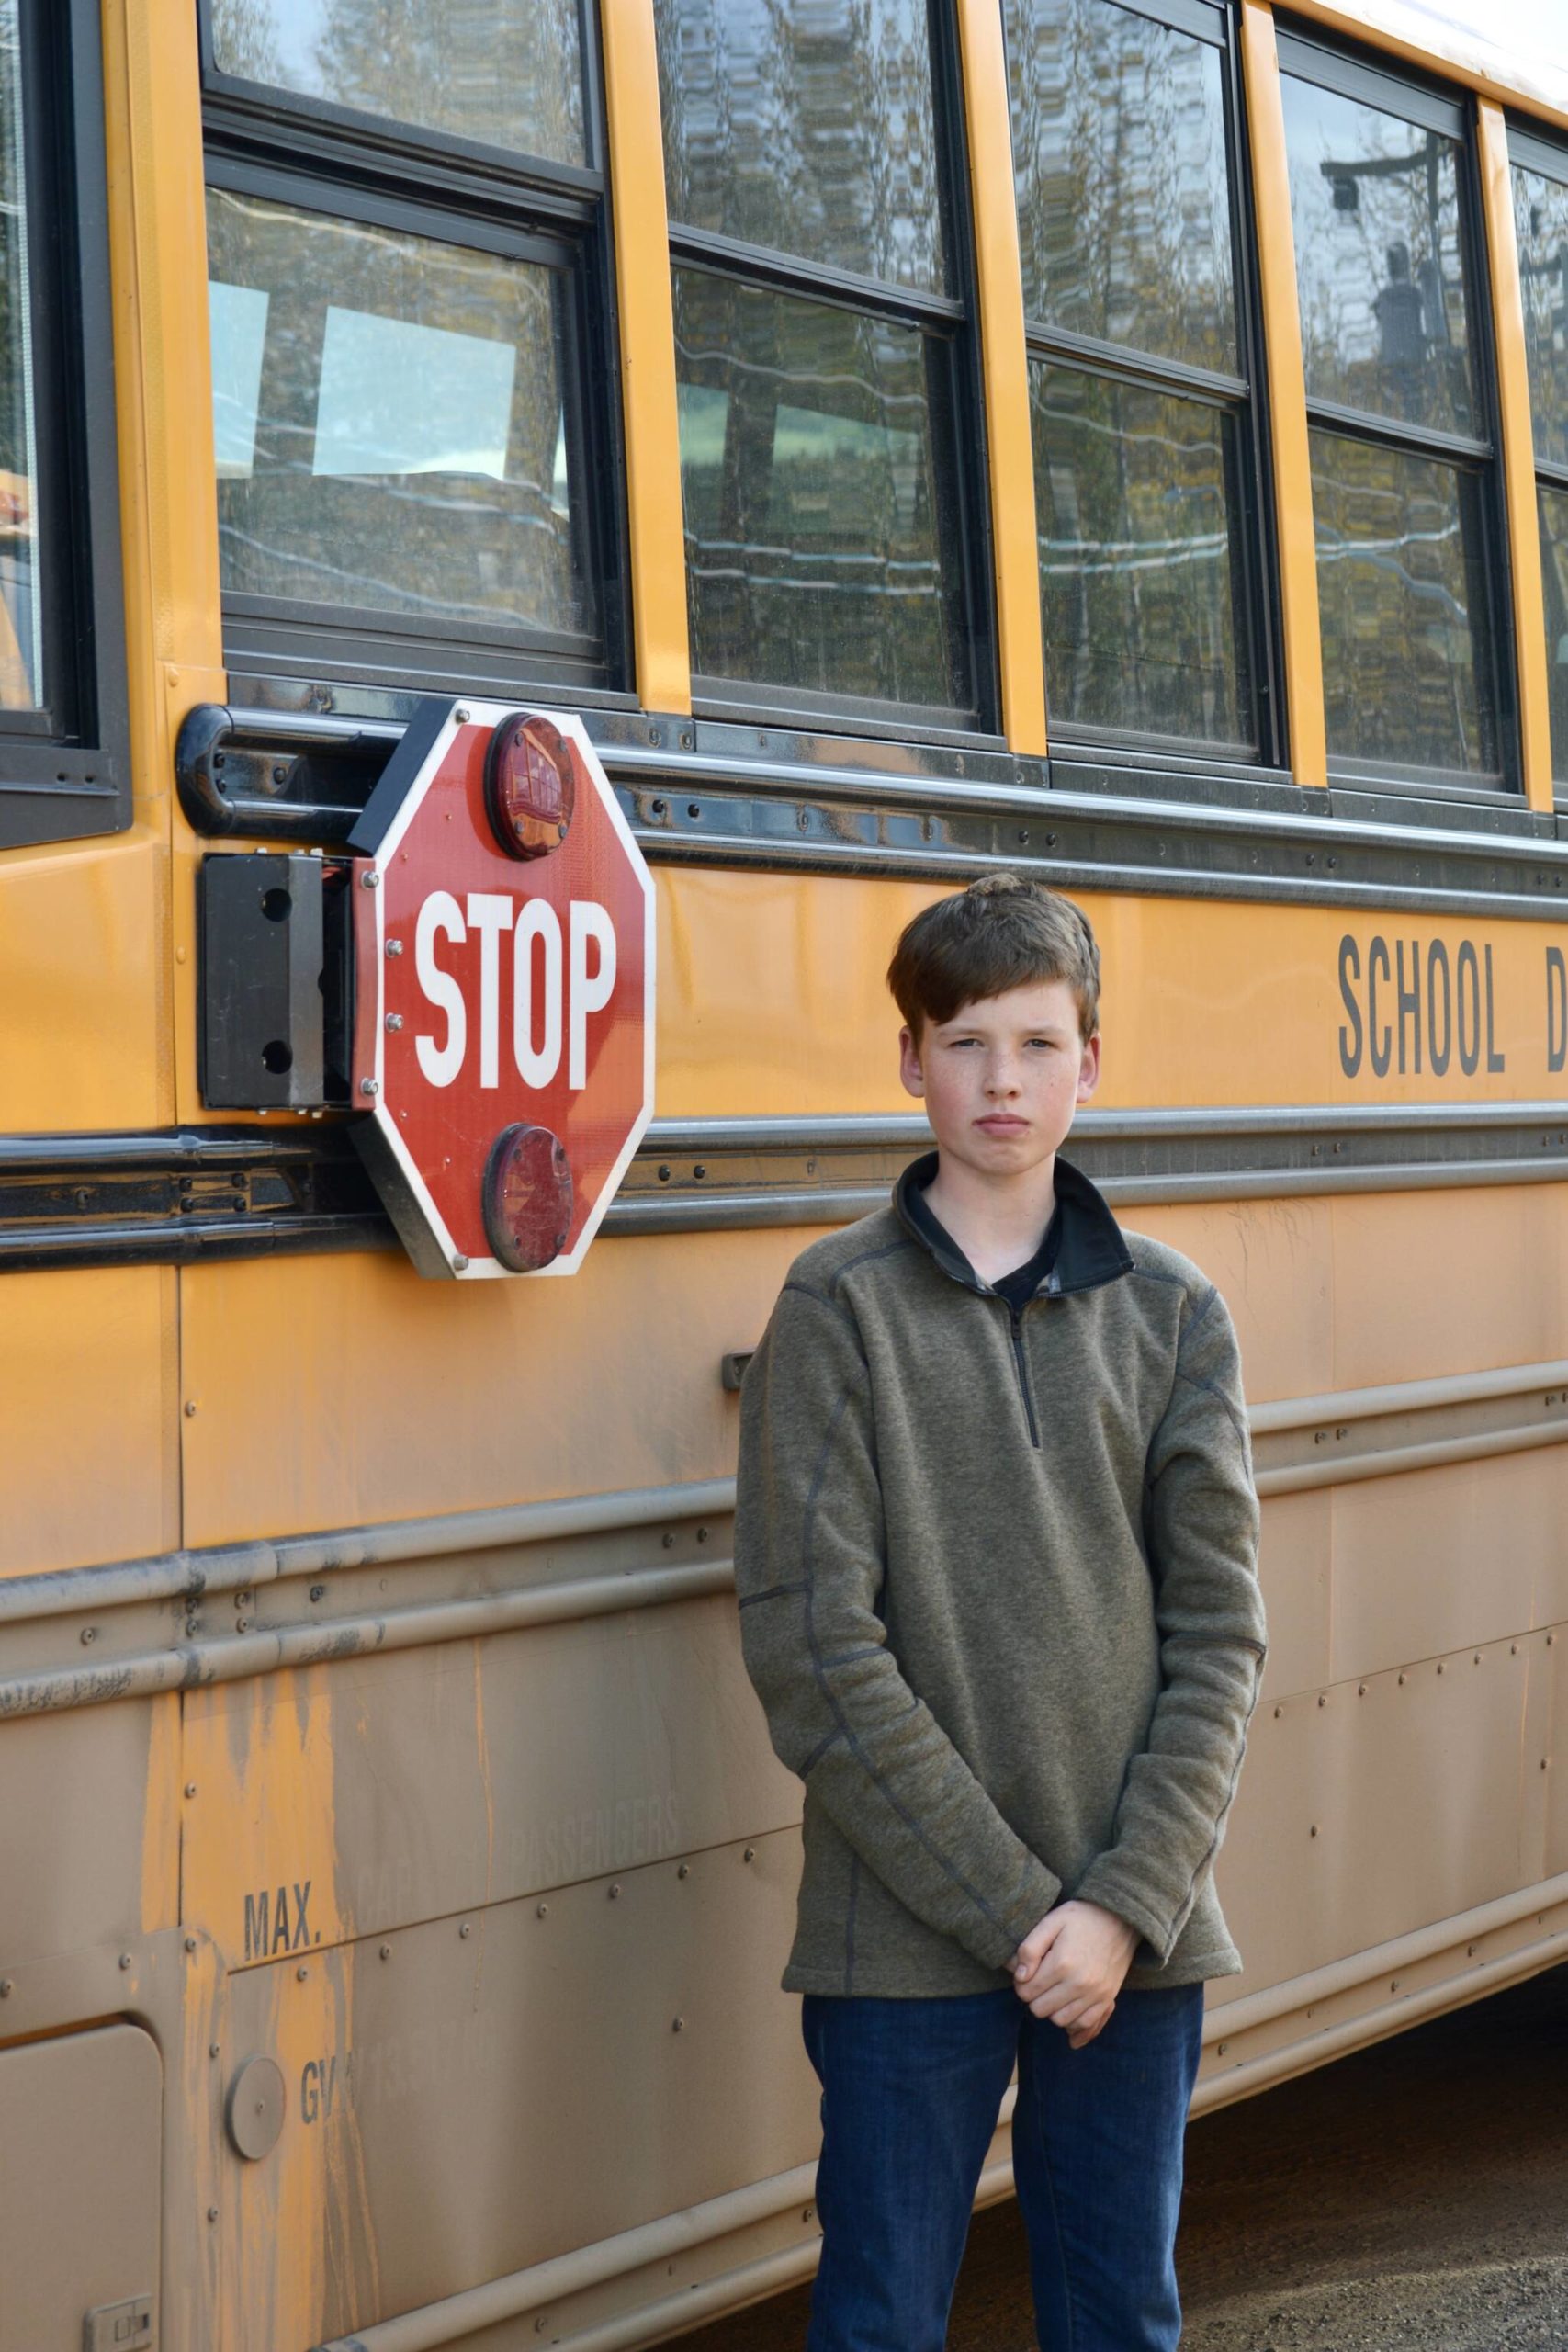 30496196_web1_220929-SIN-BREAKING-Two-quick-thinking-teens-stop-bus-and-call-for-medial-help-bus-photos-with-Jimmy_2